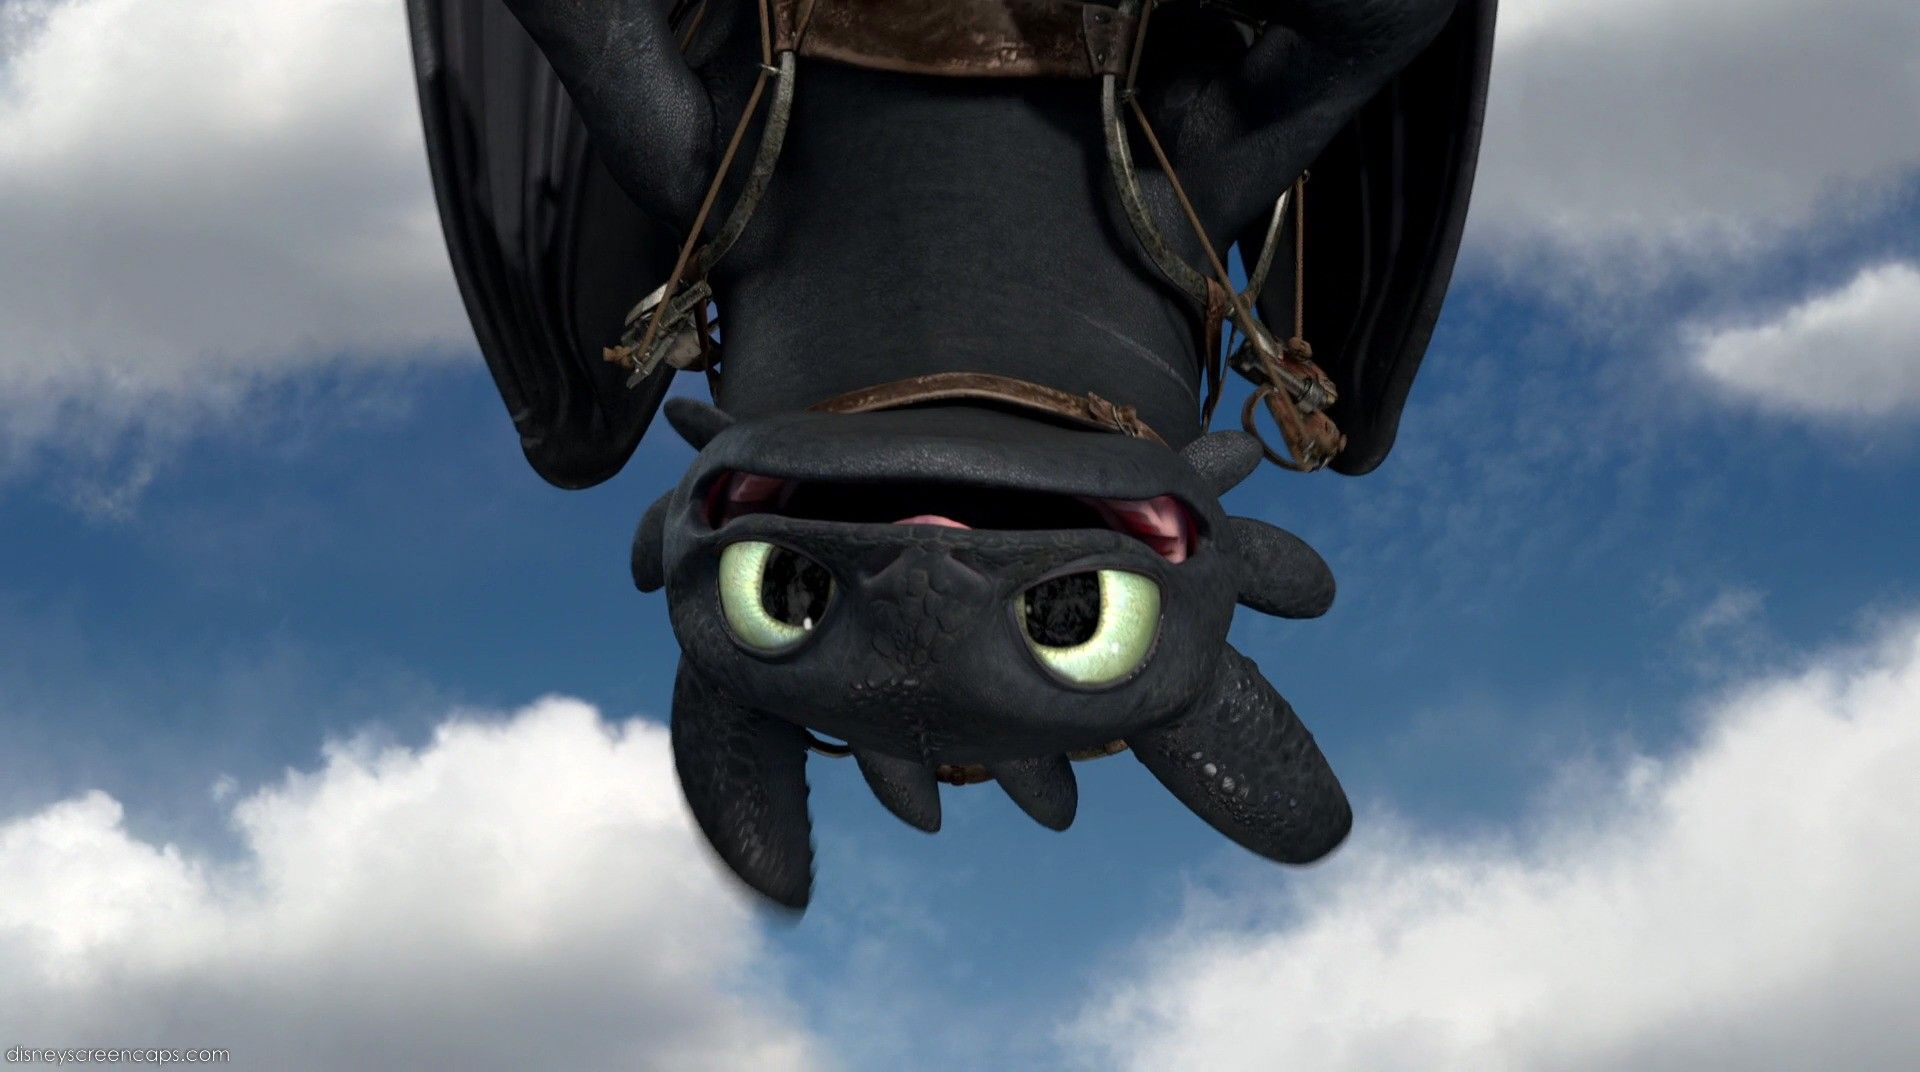 How to Train Your Dragon 2 Pictures, Wallpapers and Desktop